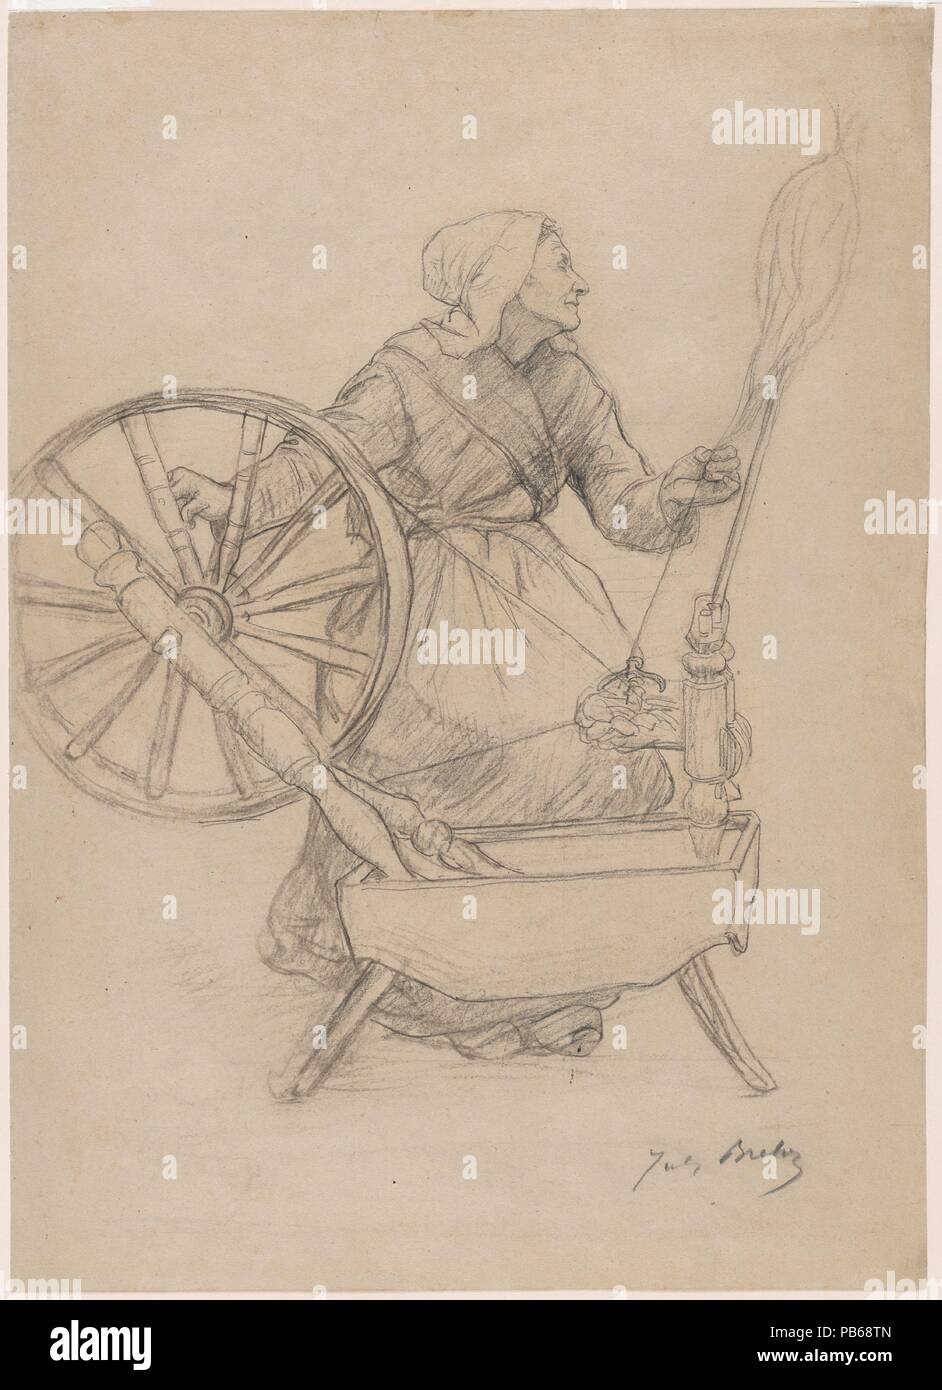 Woman at the Spinning Wheel. Artist: Jules Breton (French, Courrières 1827-1906 Paris). Dimensions: Sheet: 18 1/2 × 13 3/8 in. (47 × 34 cm). Date: 1884.  Devoted to his native region of Artois in Northern France, Breton found success as a realist painter depicting rural life there. This elderly spinner appears in the lower left of his painting Le Dernier Rayon (The Last Ray of Sunshine), 1885 (current location unknown). Breton's wife, Elodie, recorded that her husband began this drawing early in the morning on March 24, 1884, sketching a local woman by the name of Colette. Breton depicts her l Stock Photo